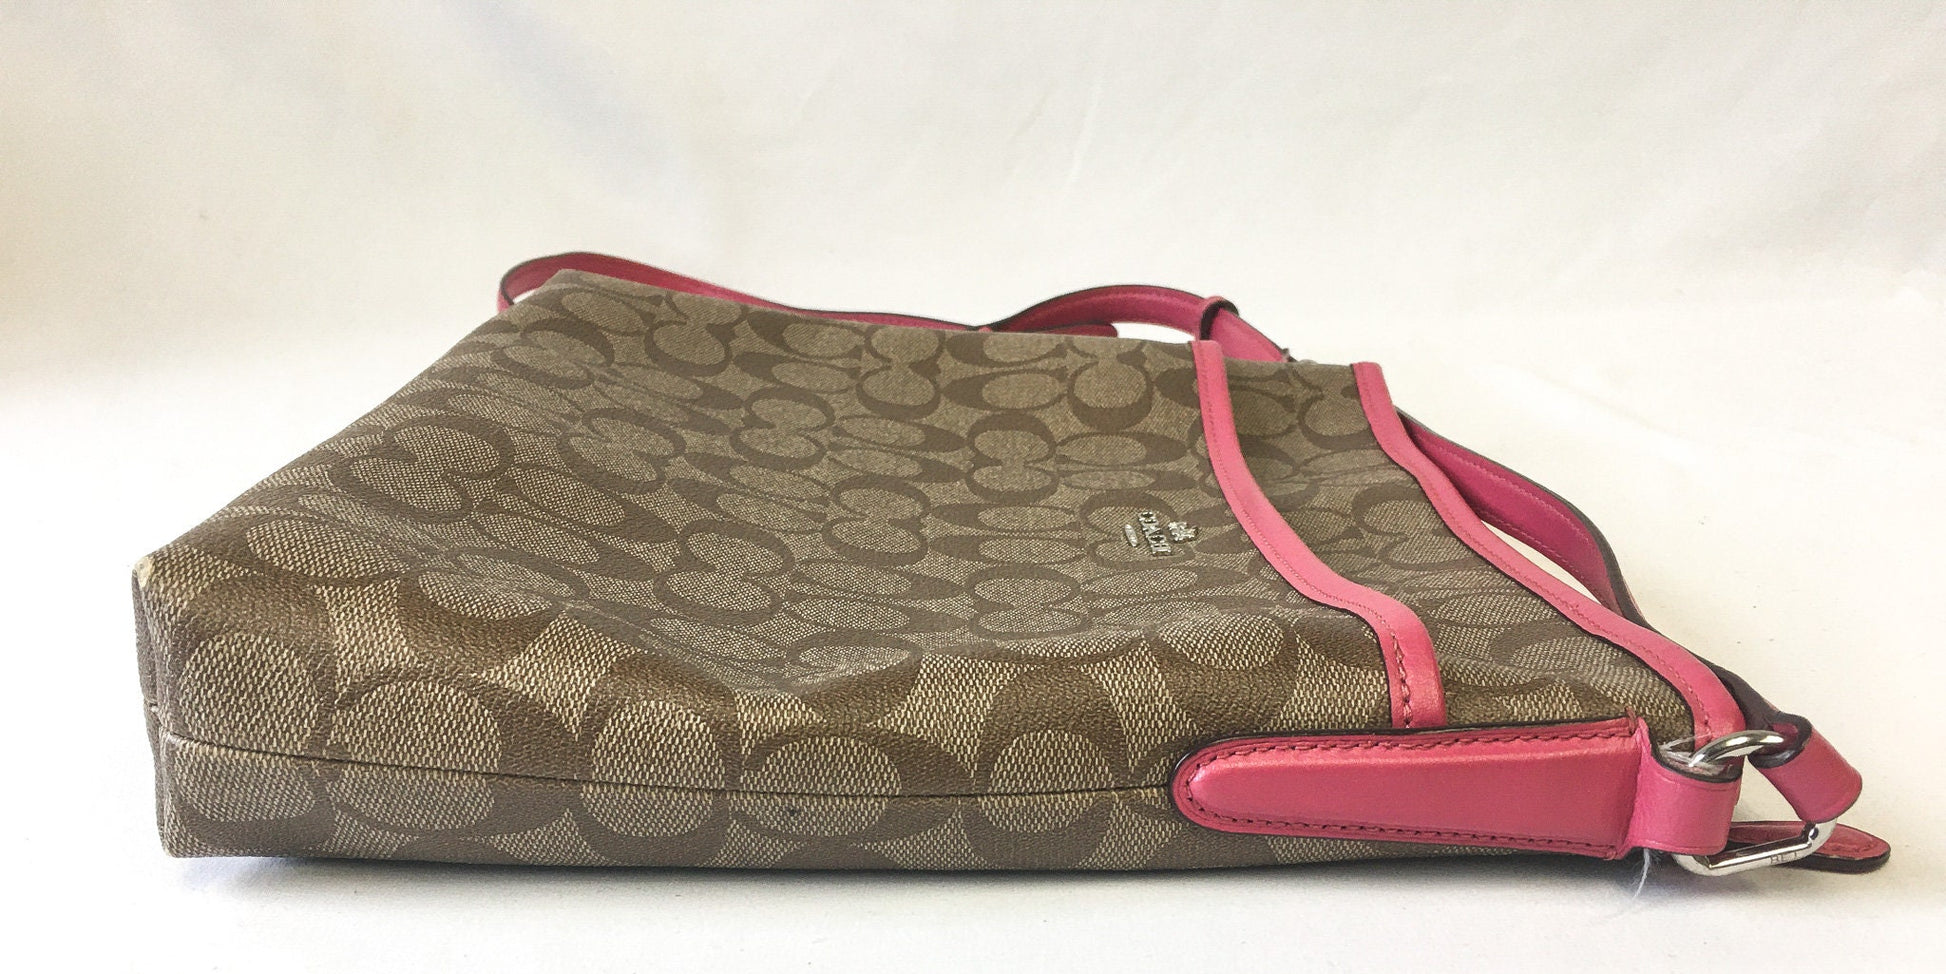 Vintage COACH Signature File Crossbody Bag with Pink Leather Trim and Matching Wallet, Style #F58297